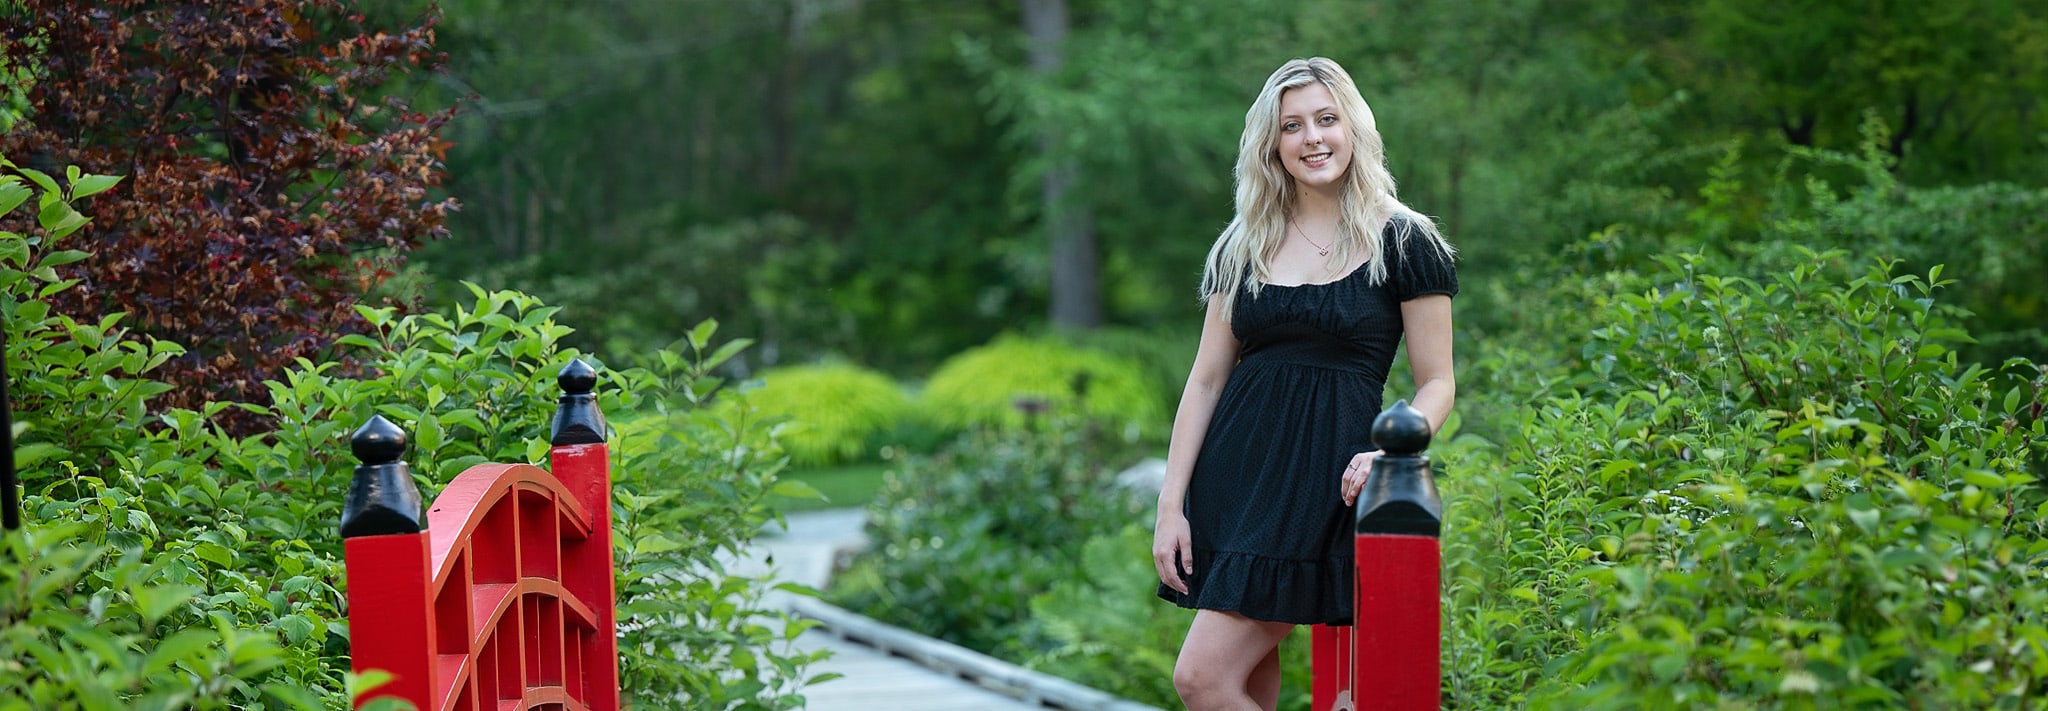 How to Plan the Perfect Senior Portrait Session